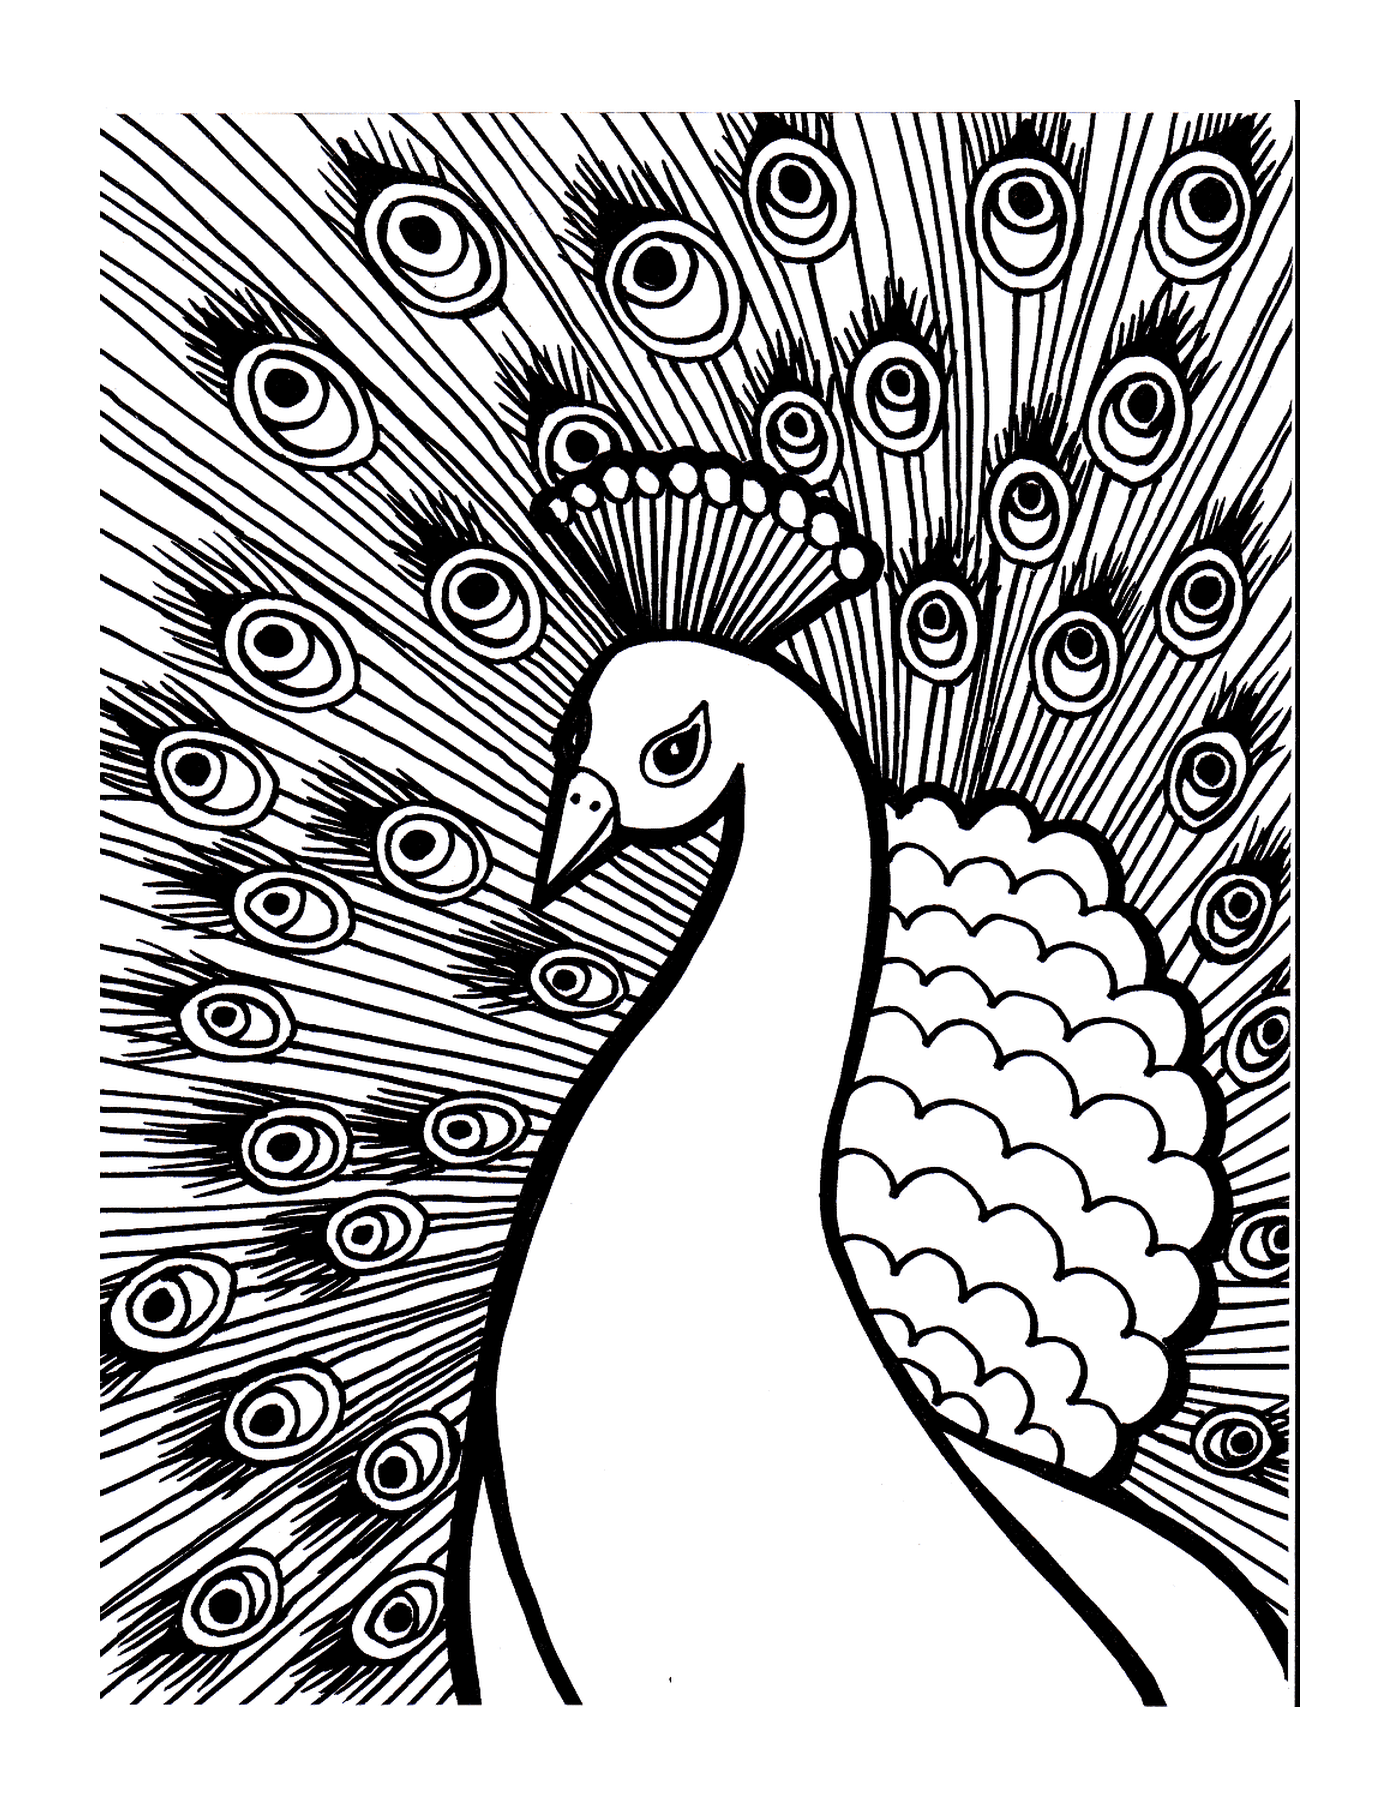  A peacock is drawn 